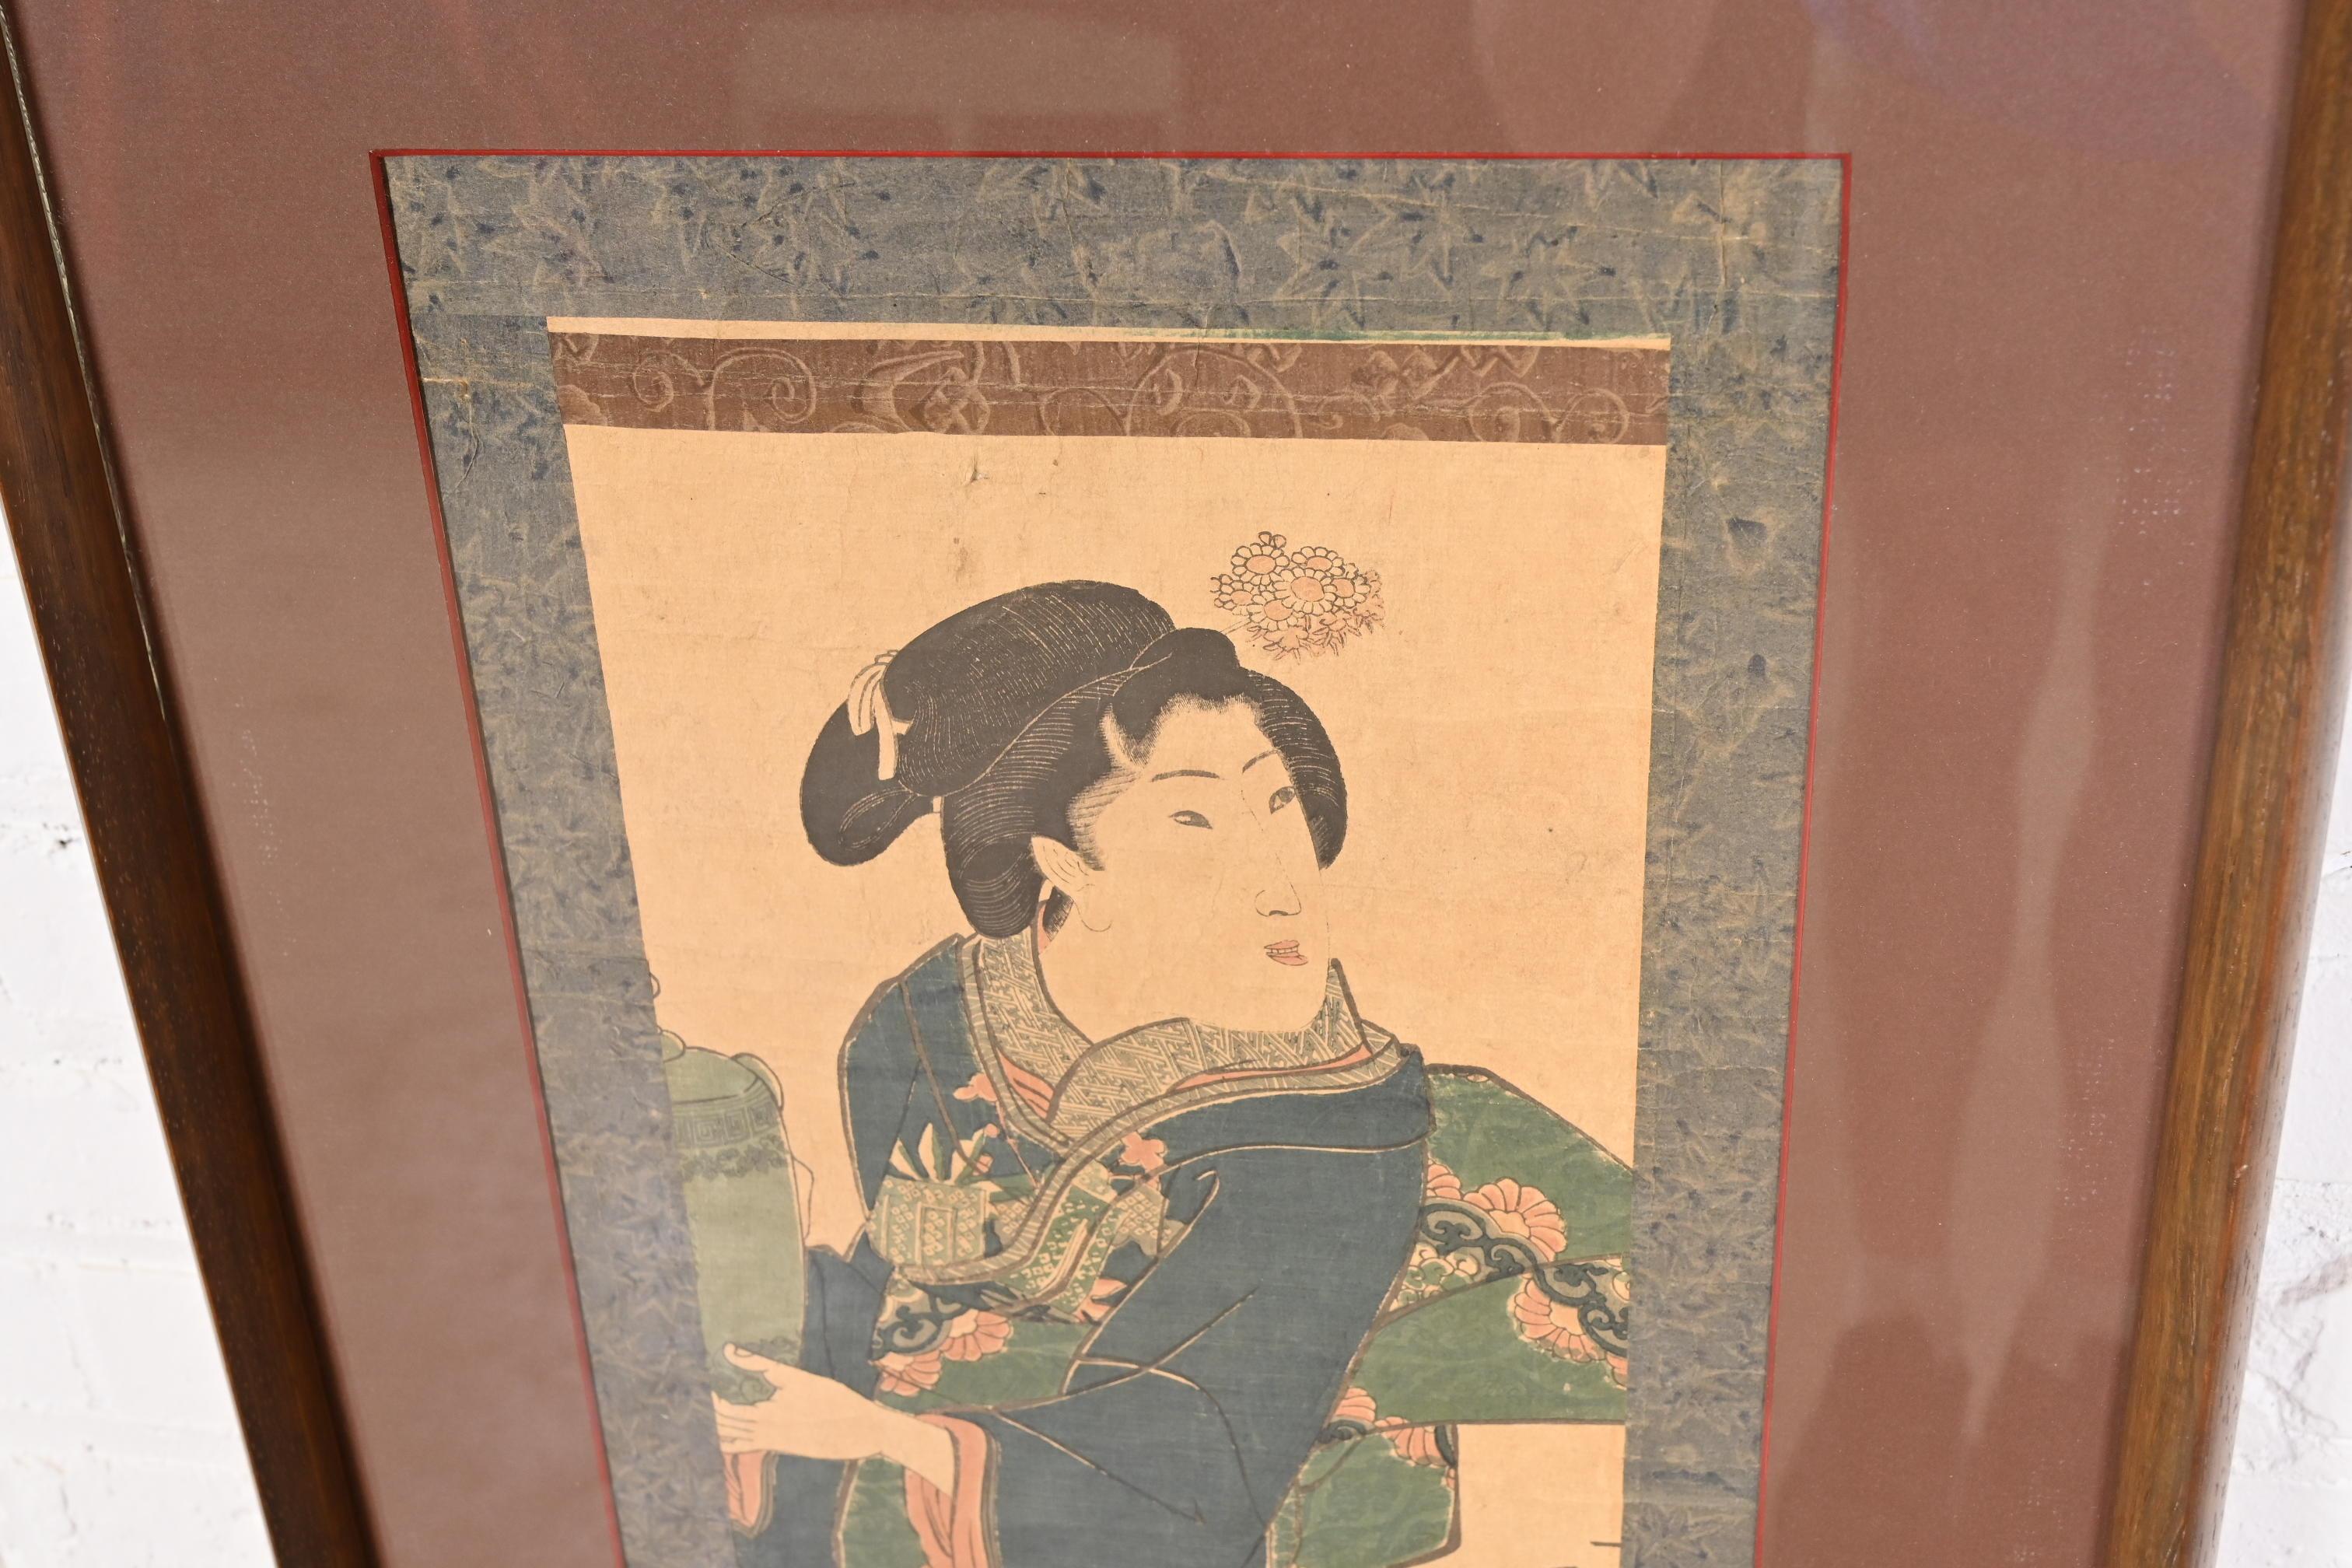 Japanese Scroll Painting of Woman From Frank Lloyd Wright's DeRhode's House 1